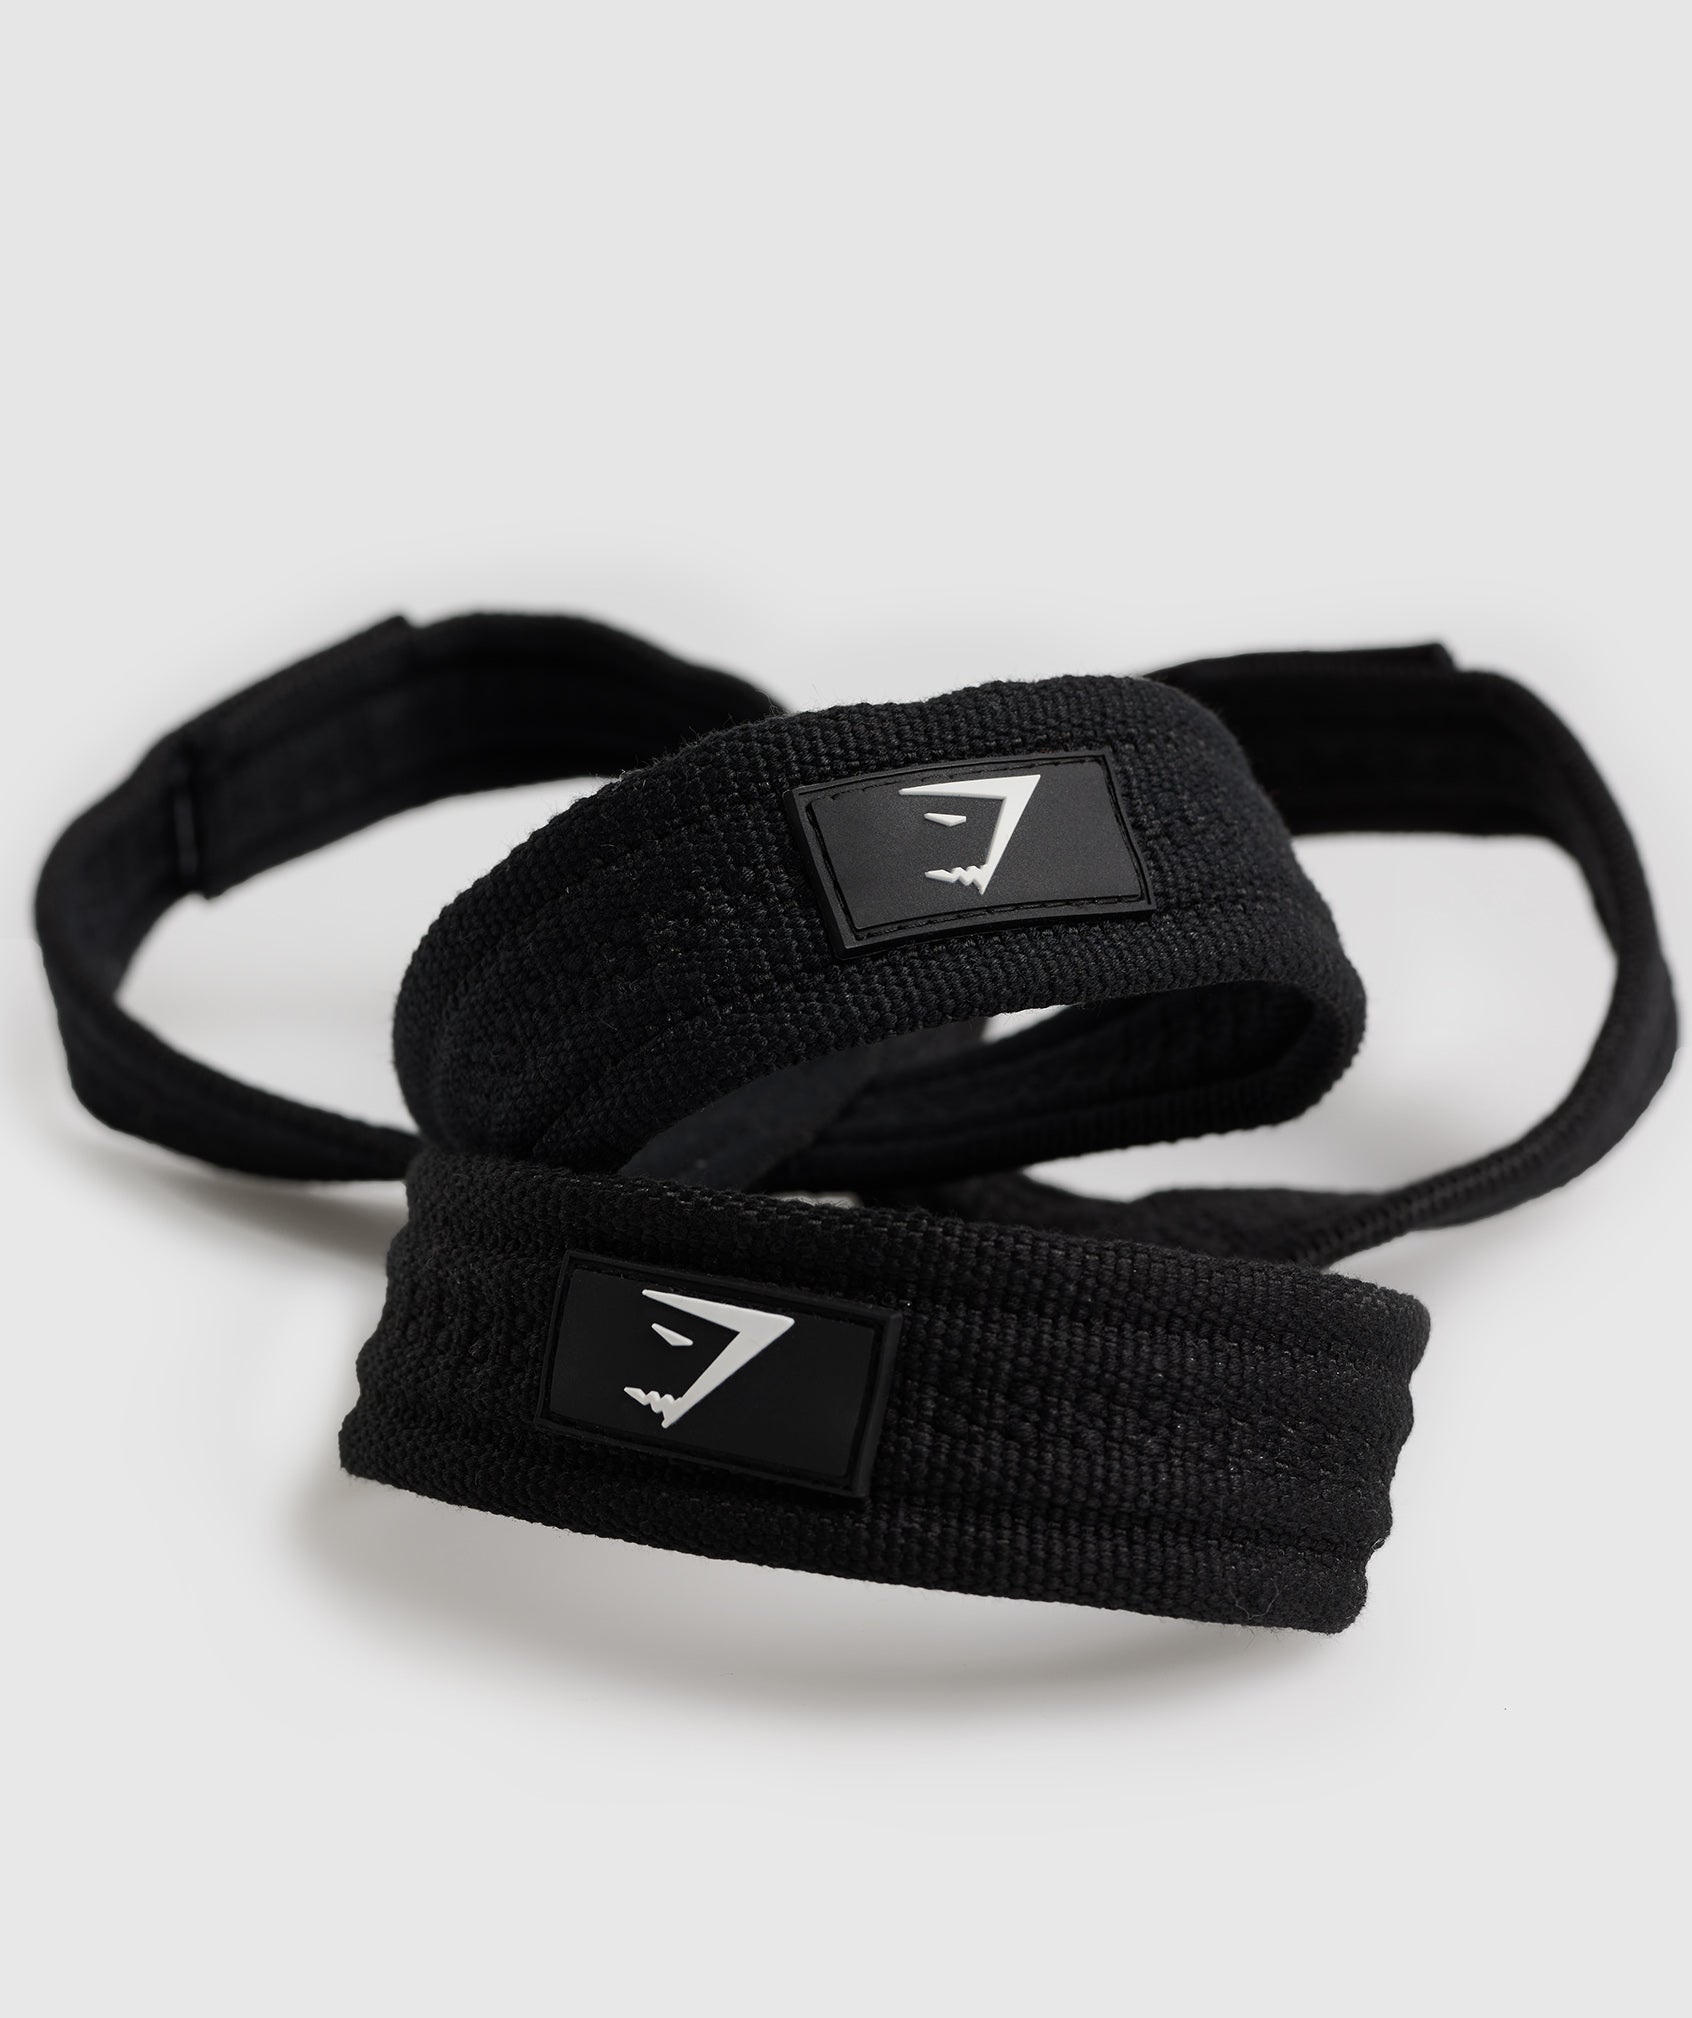 What Are Figure 8 Lifting Straps & How Do You Use Them?